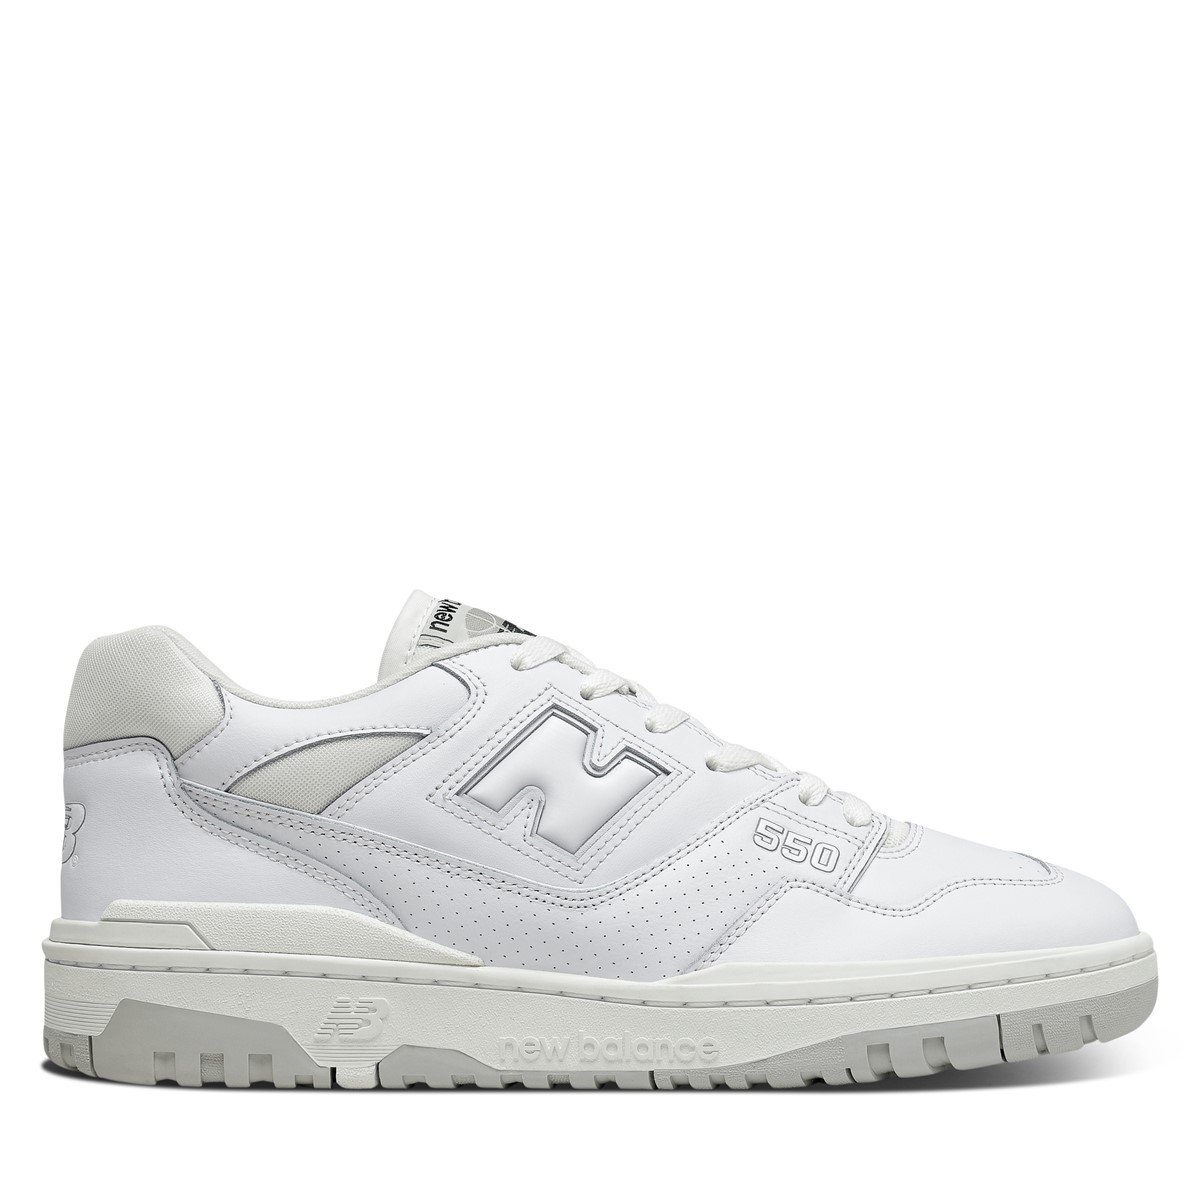 BB550 Sneakers in White